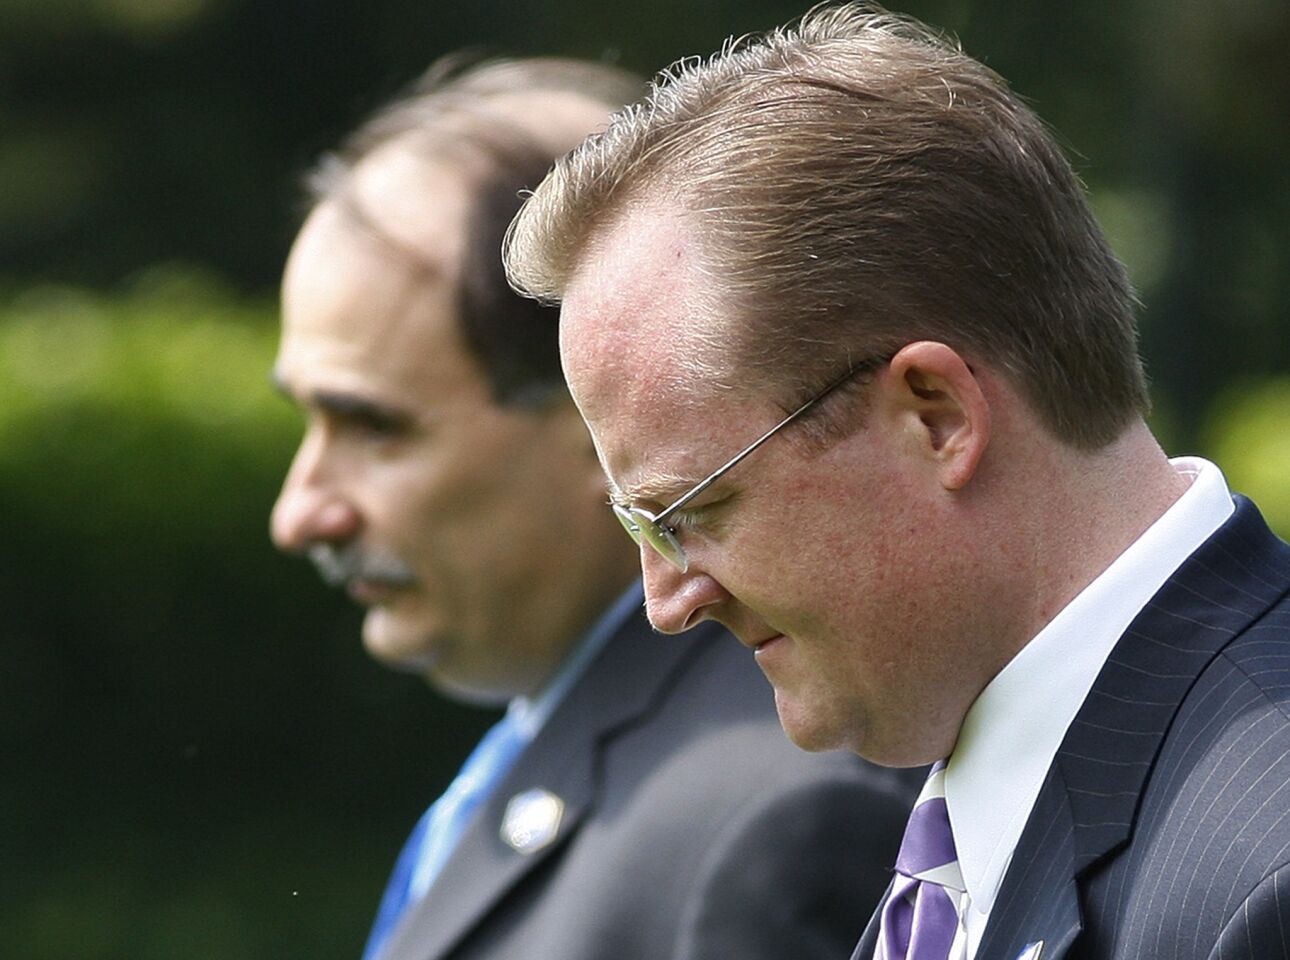 Robert Gibbs wore a number of hats during his time with President Obama, serving as communications director for Obama during his time in the Senate and his 2008 campaign. After the 2008 victory, he became the White House press secretary until 2011, when he shifted to being an advisor. Gibbs is now a contributor on MSNBC, and is a co-founder of the communications practice The Incite Agency with fellow former Obama team members Ben LaBolt and Adam Fetcher.